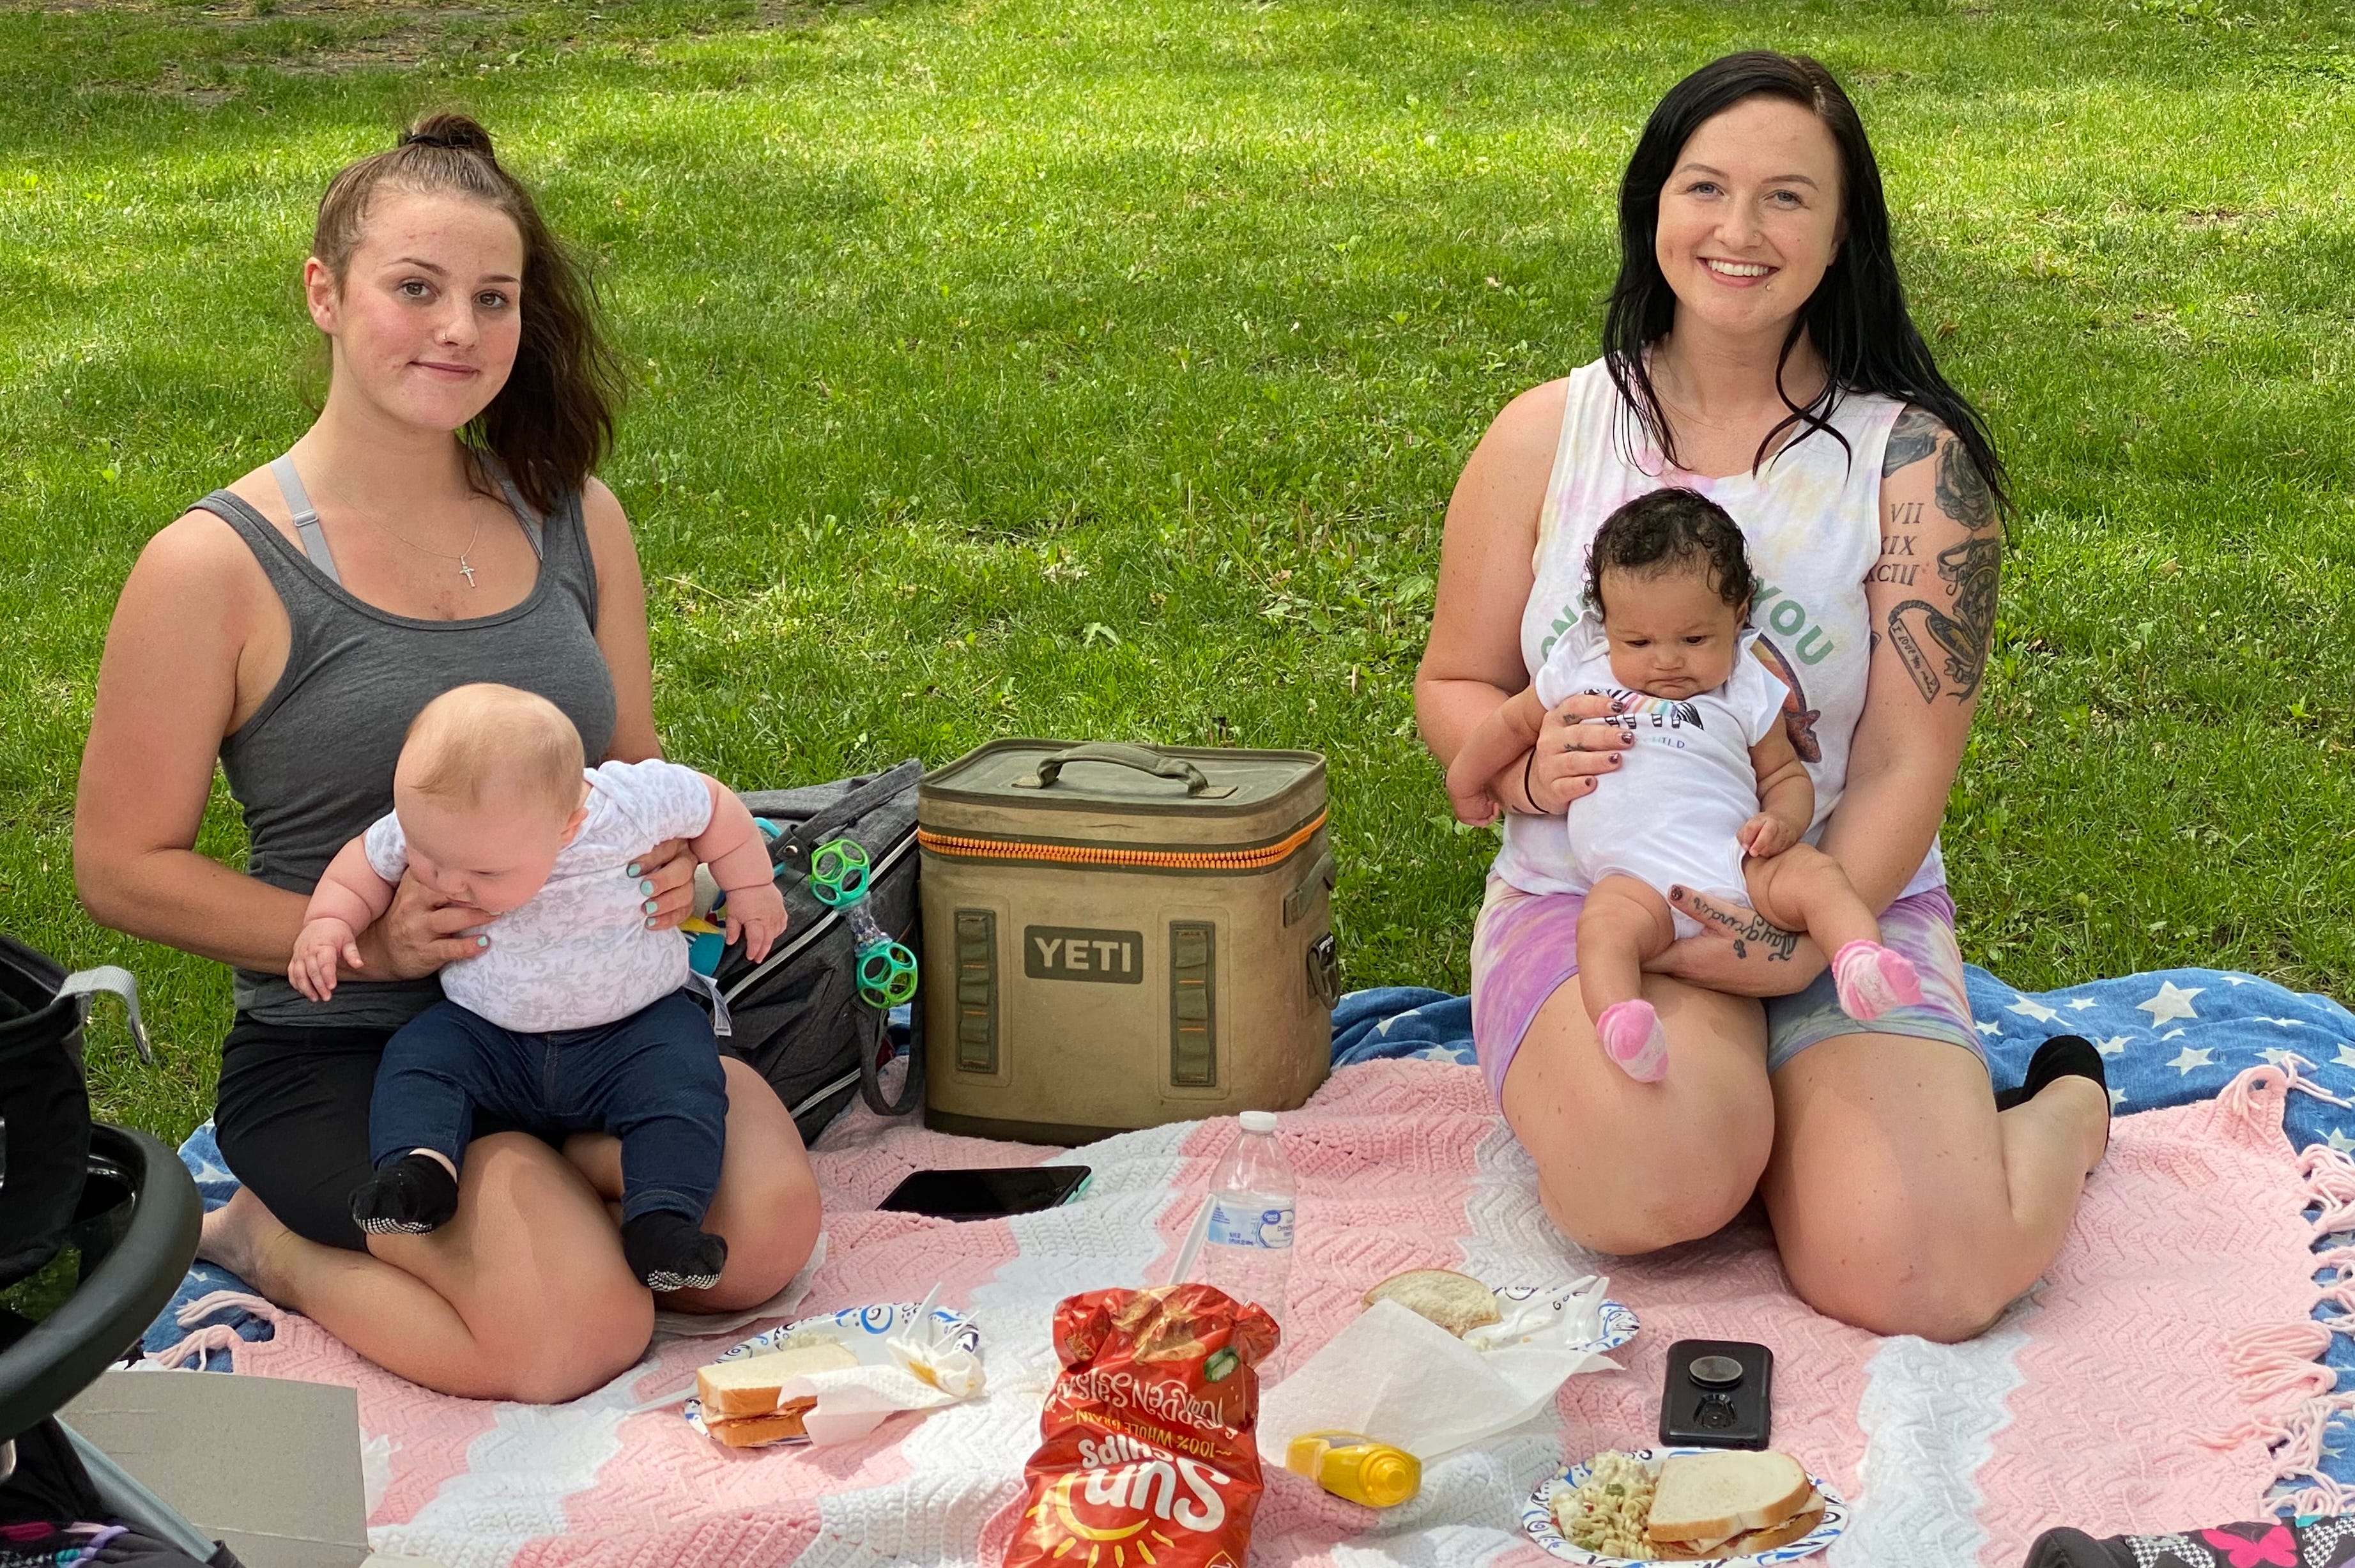 Lacey Cody, left, holds her 6-month-old daughter while picnicking at David Shepherd Park in Oak Park, MI with her sister, Tory McClellan, who is holding her 3-month old daughter.